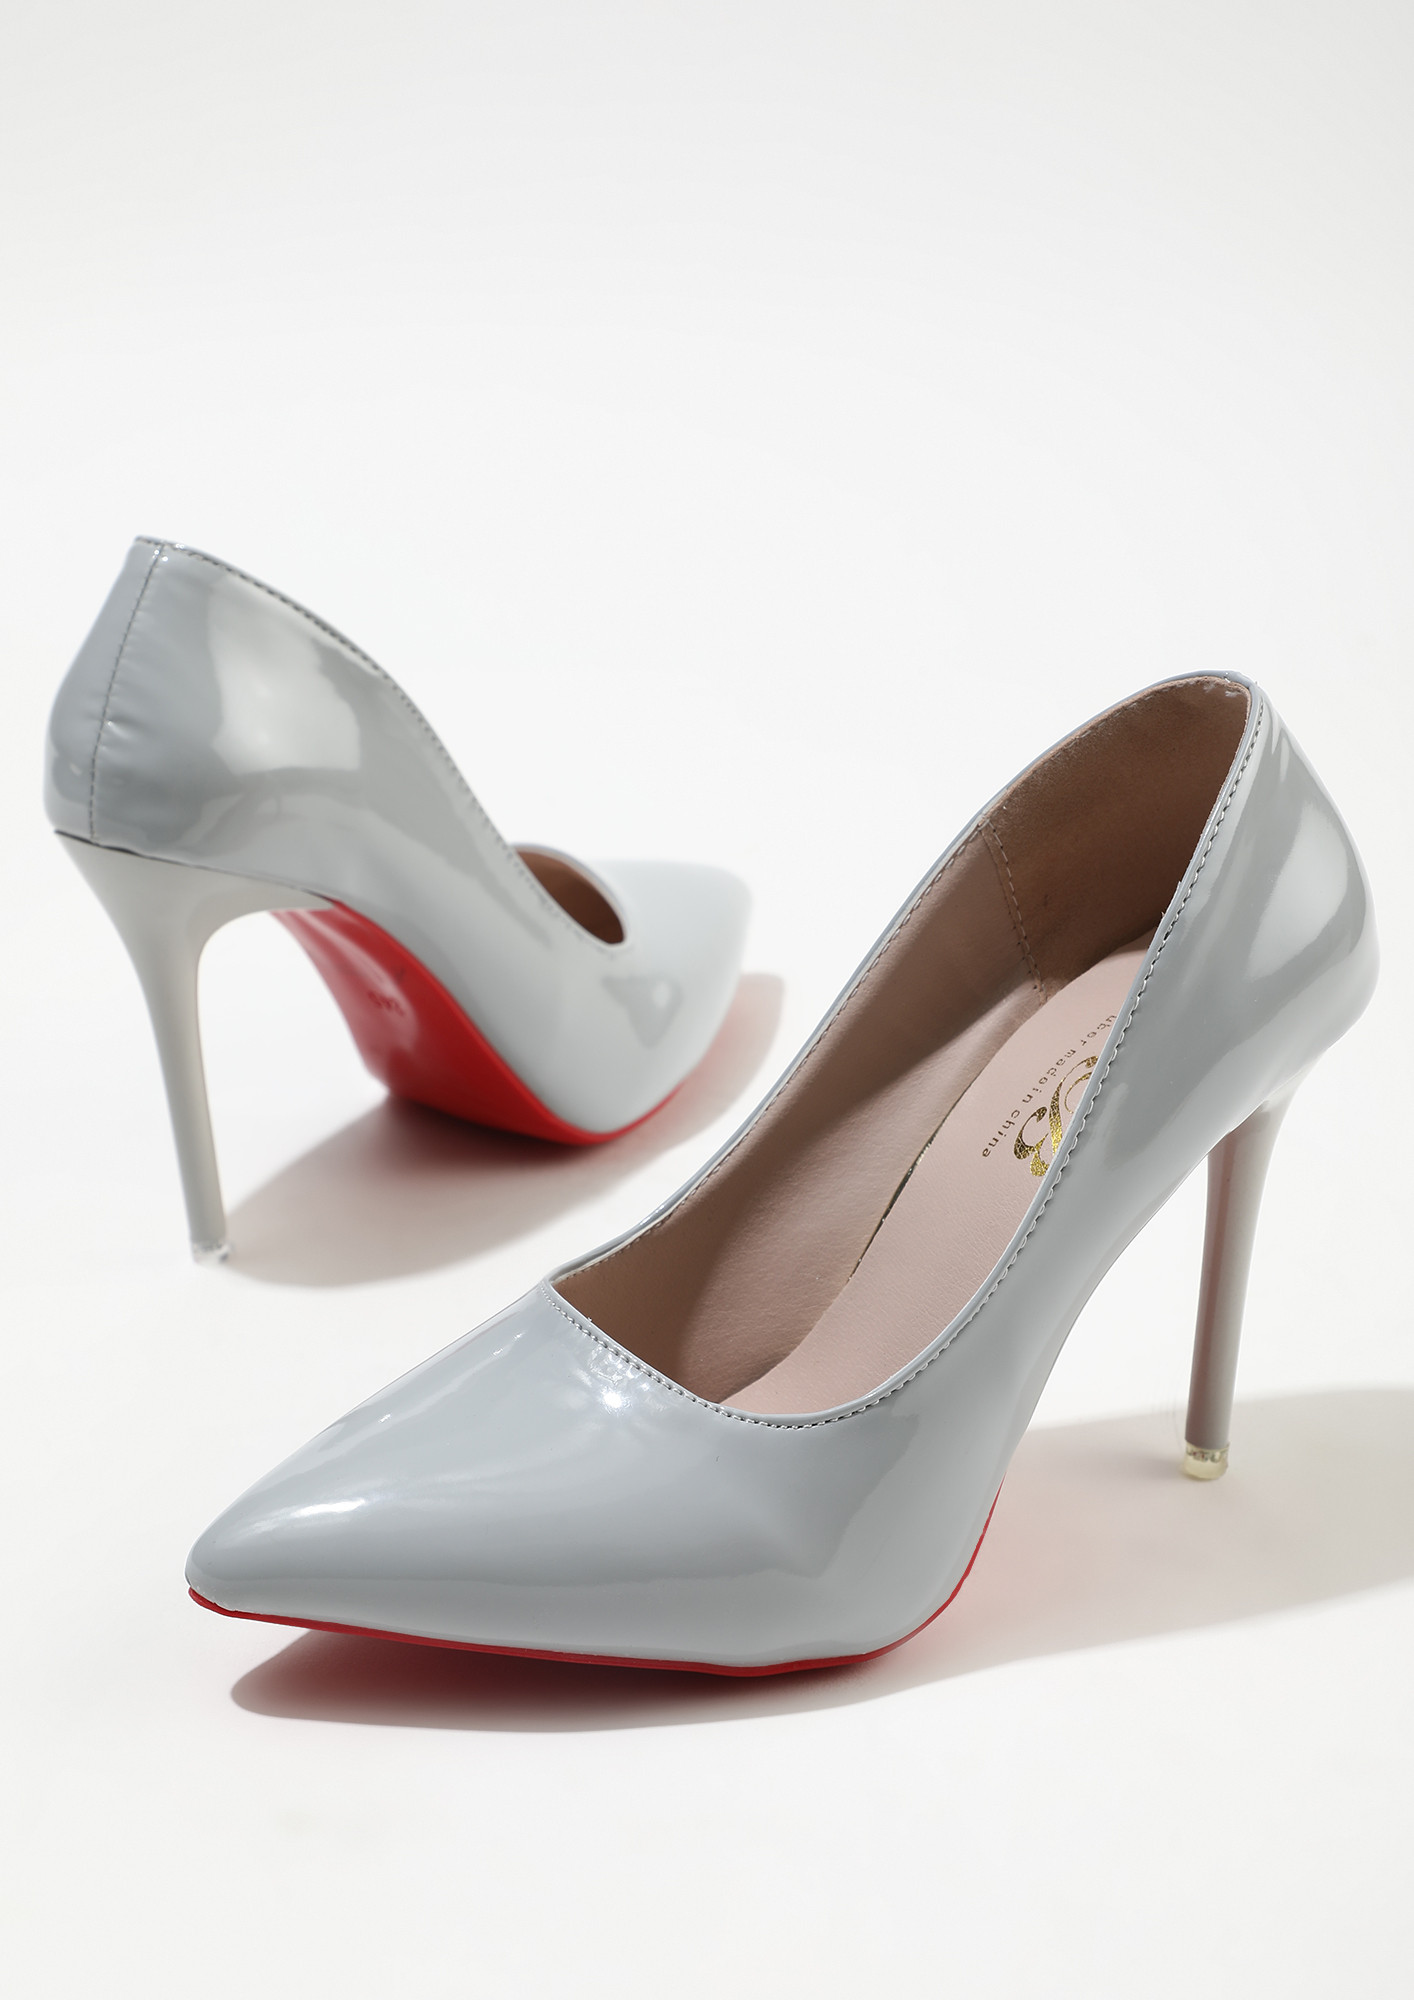 GLIMMERS OF FASHION LIGHT GREY HIGH HEELED PUMPS